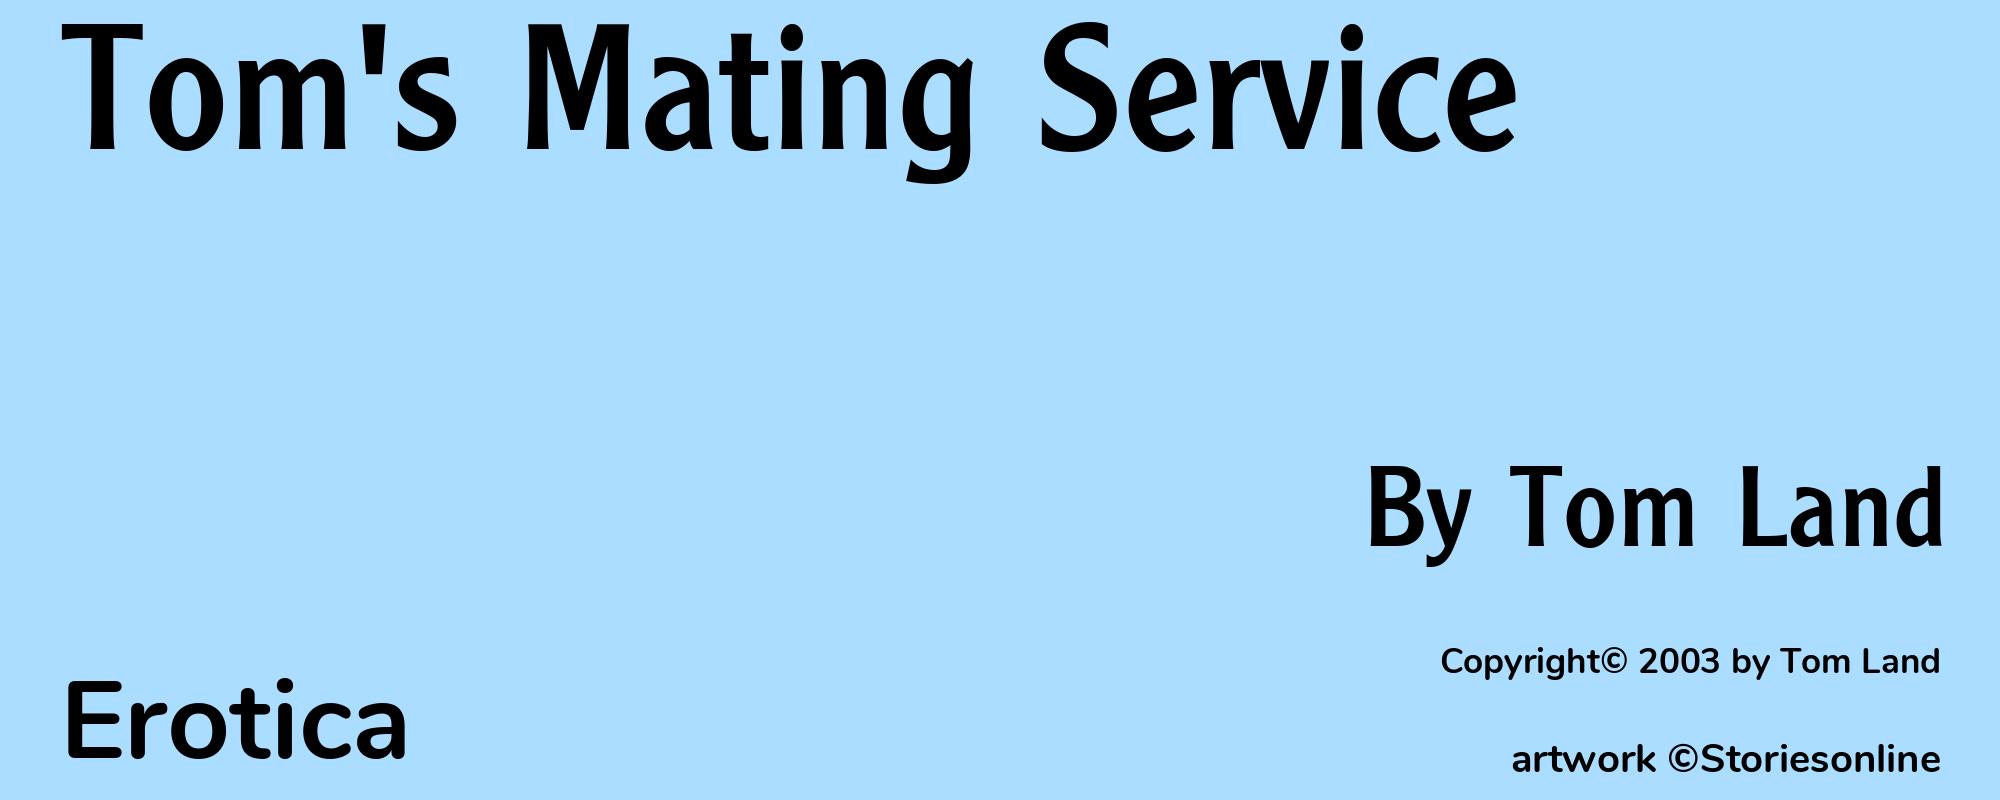 Tom's Mating Service - Cover